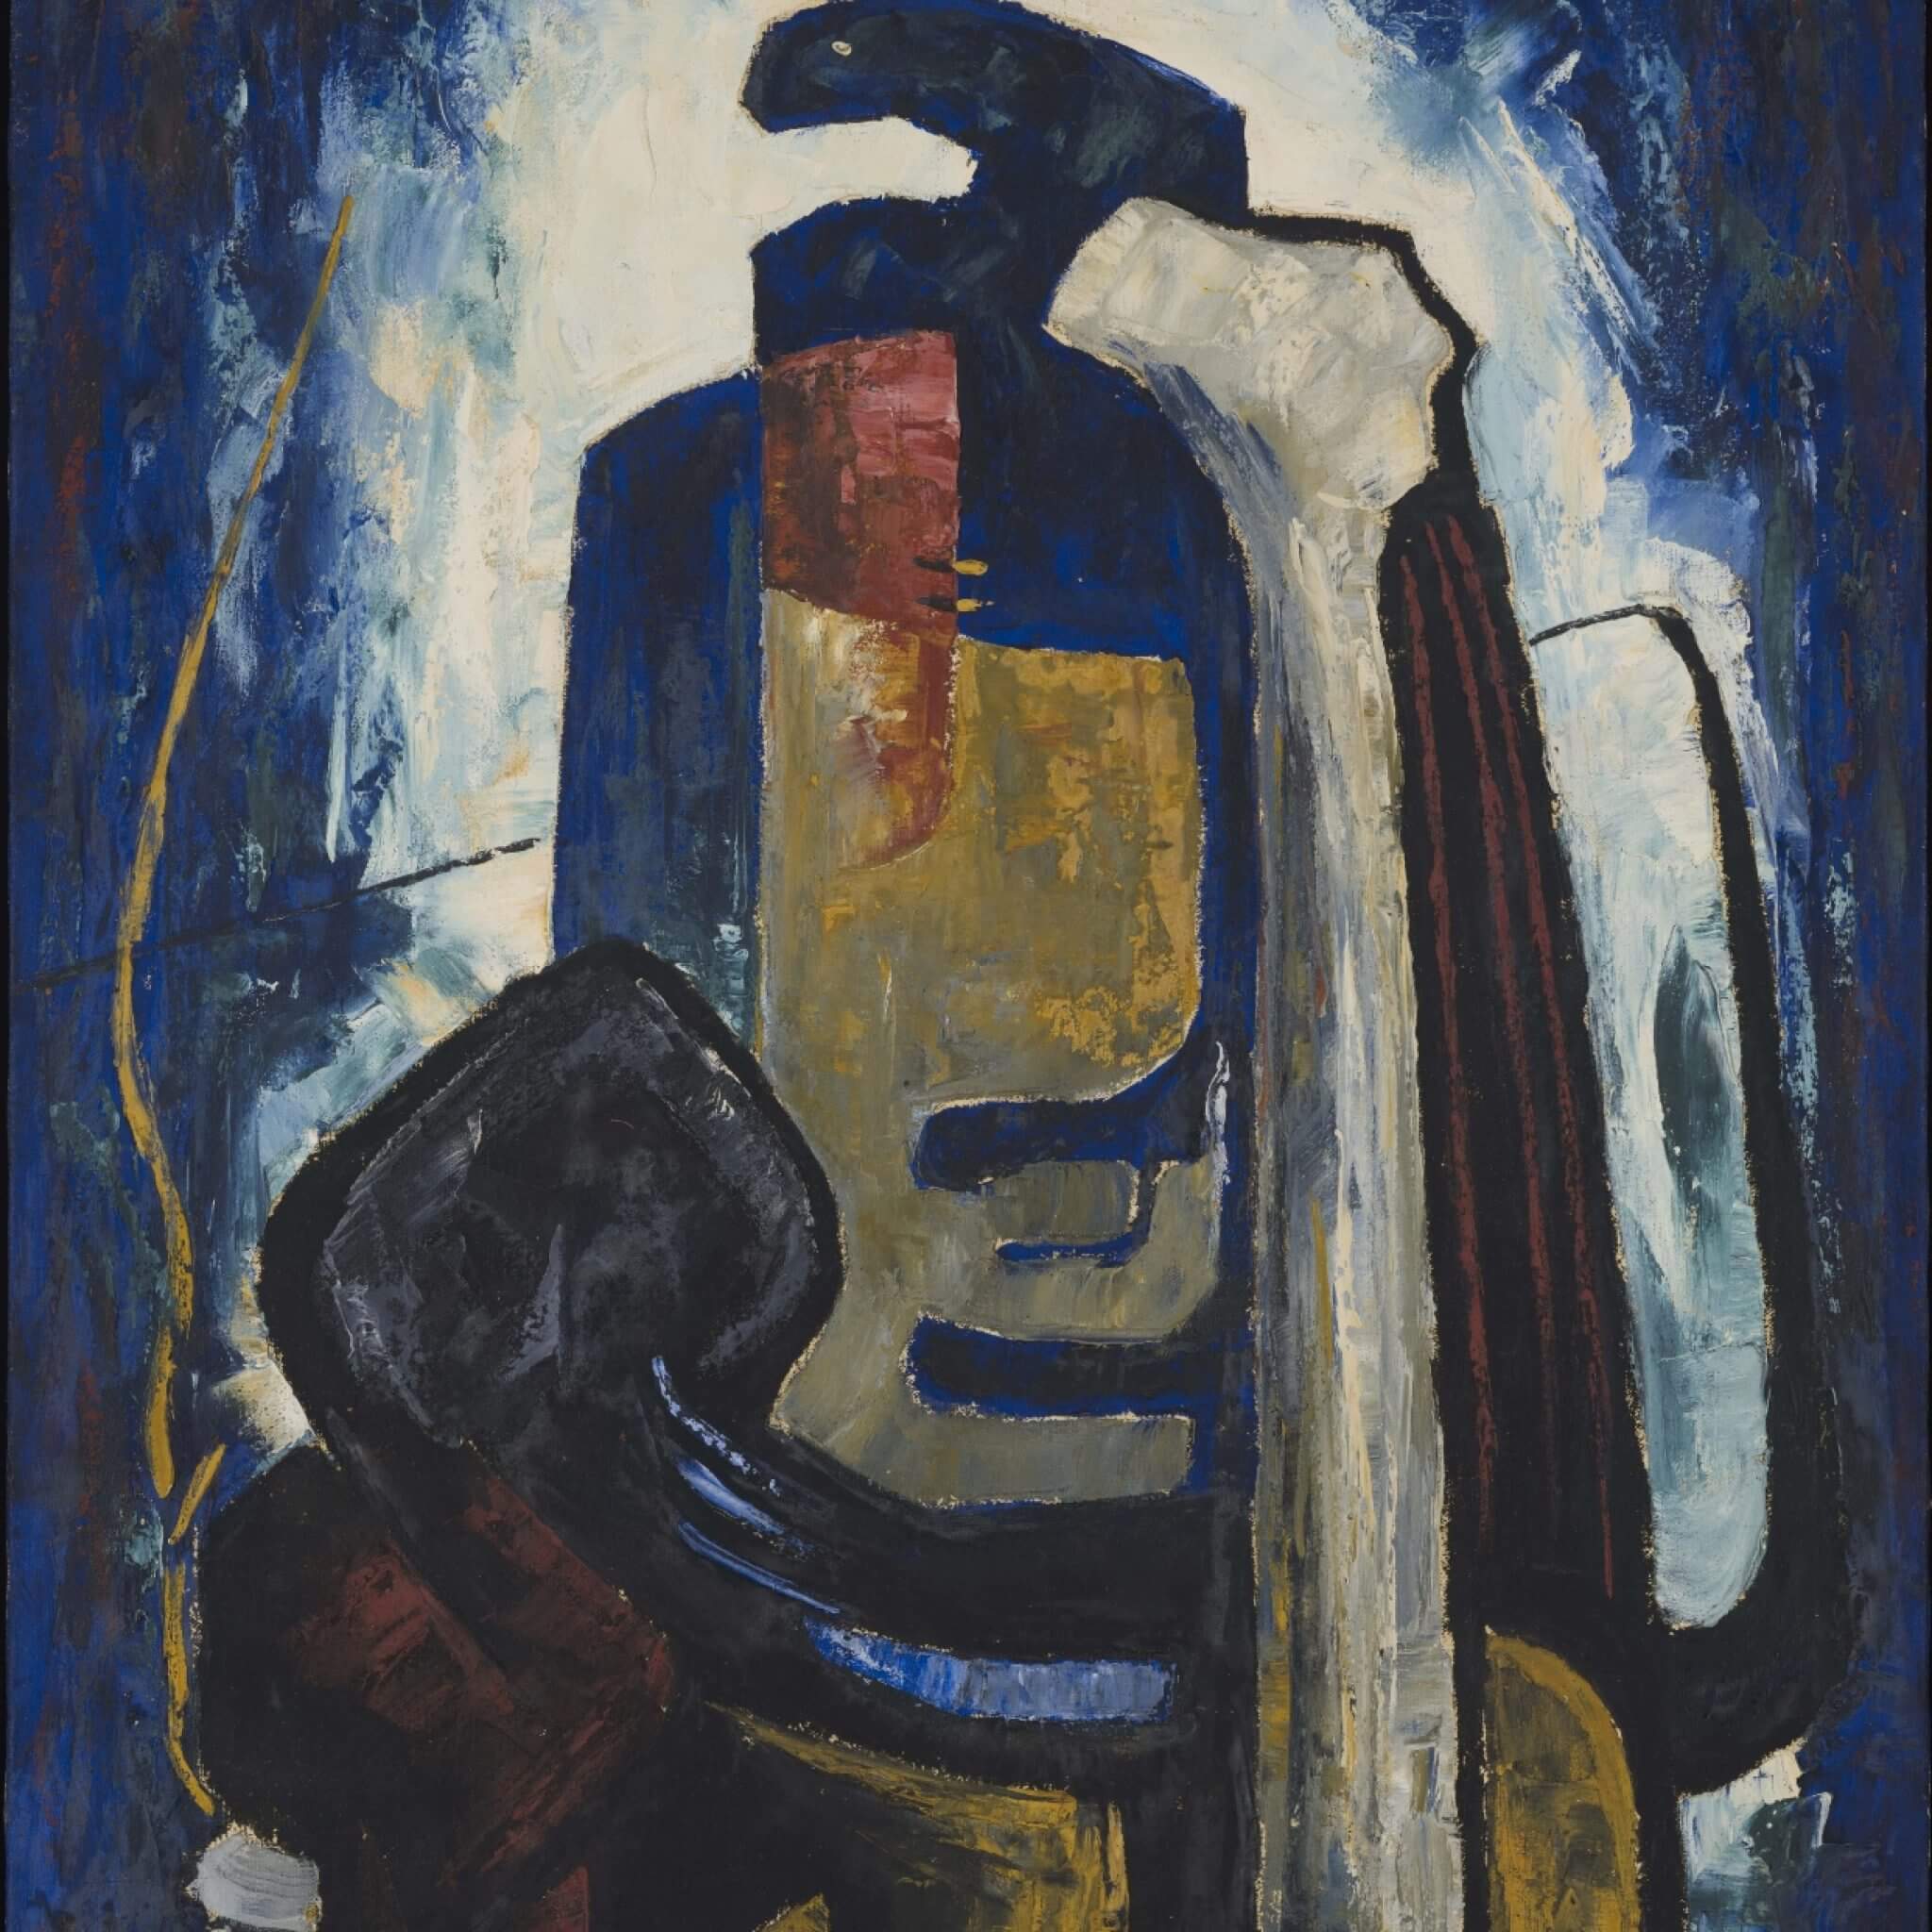 Abstract oil painting with blue, black, brown, and white paint of a human figure and machinery